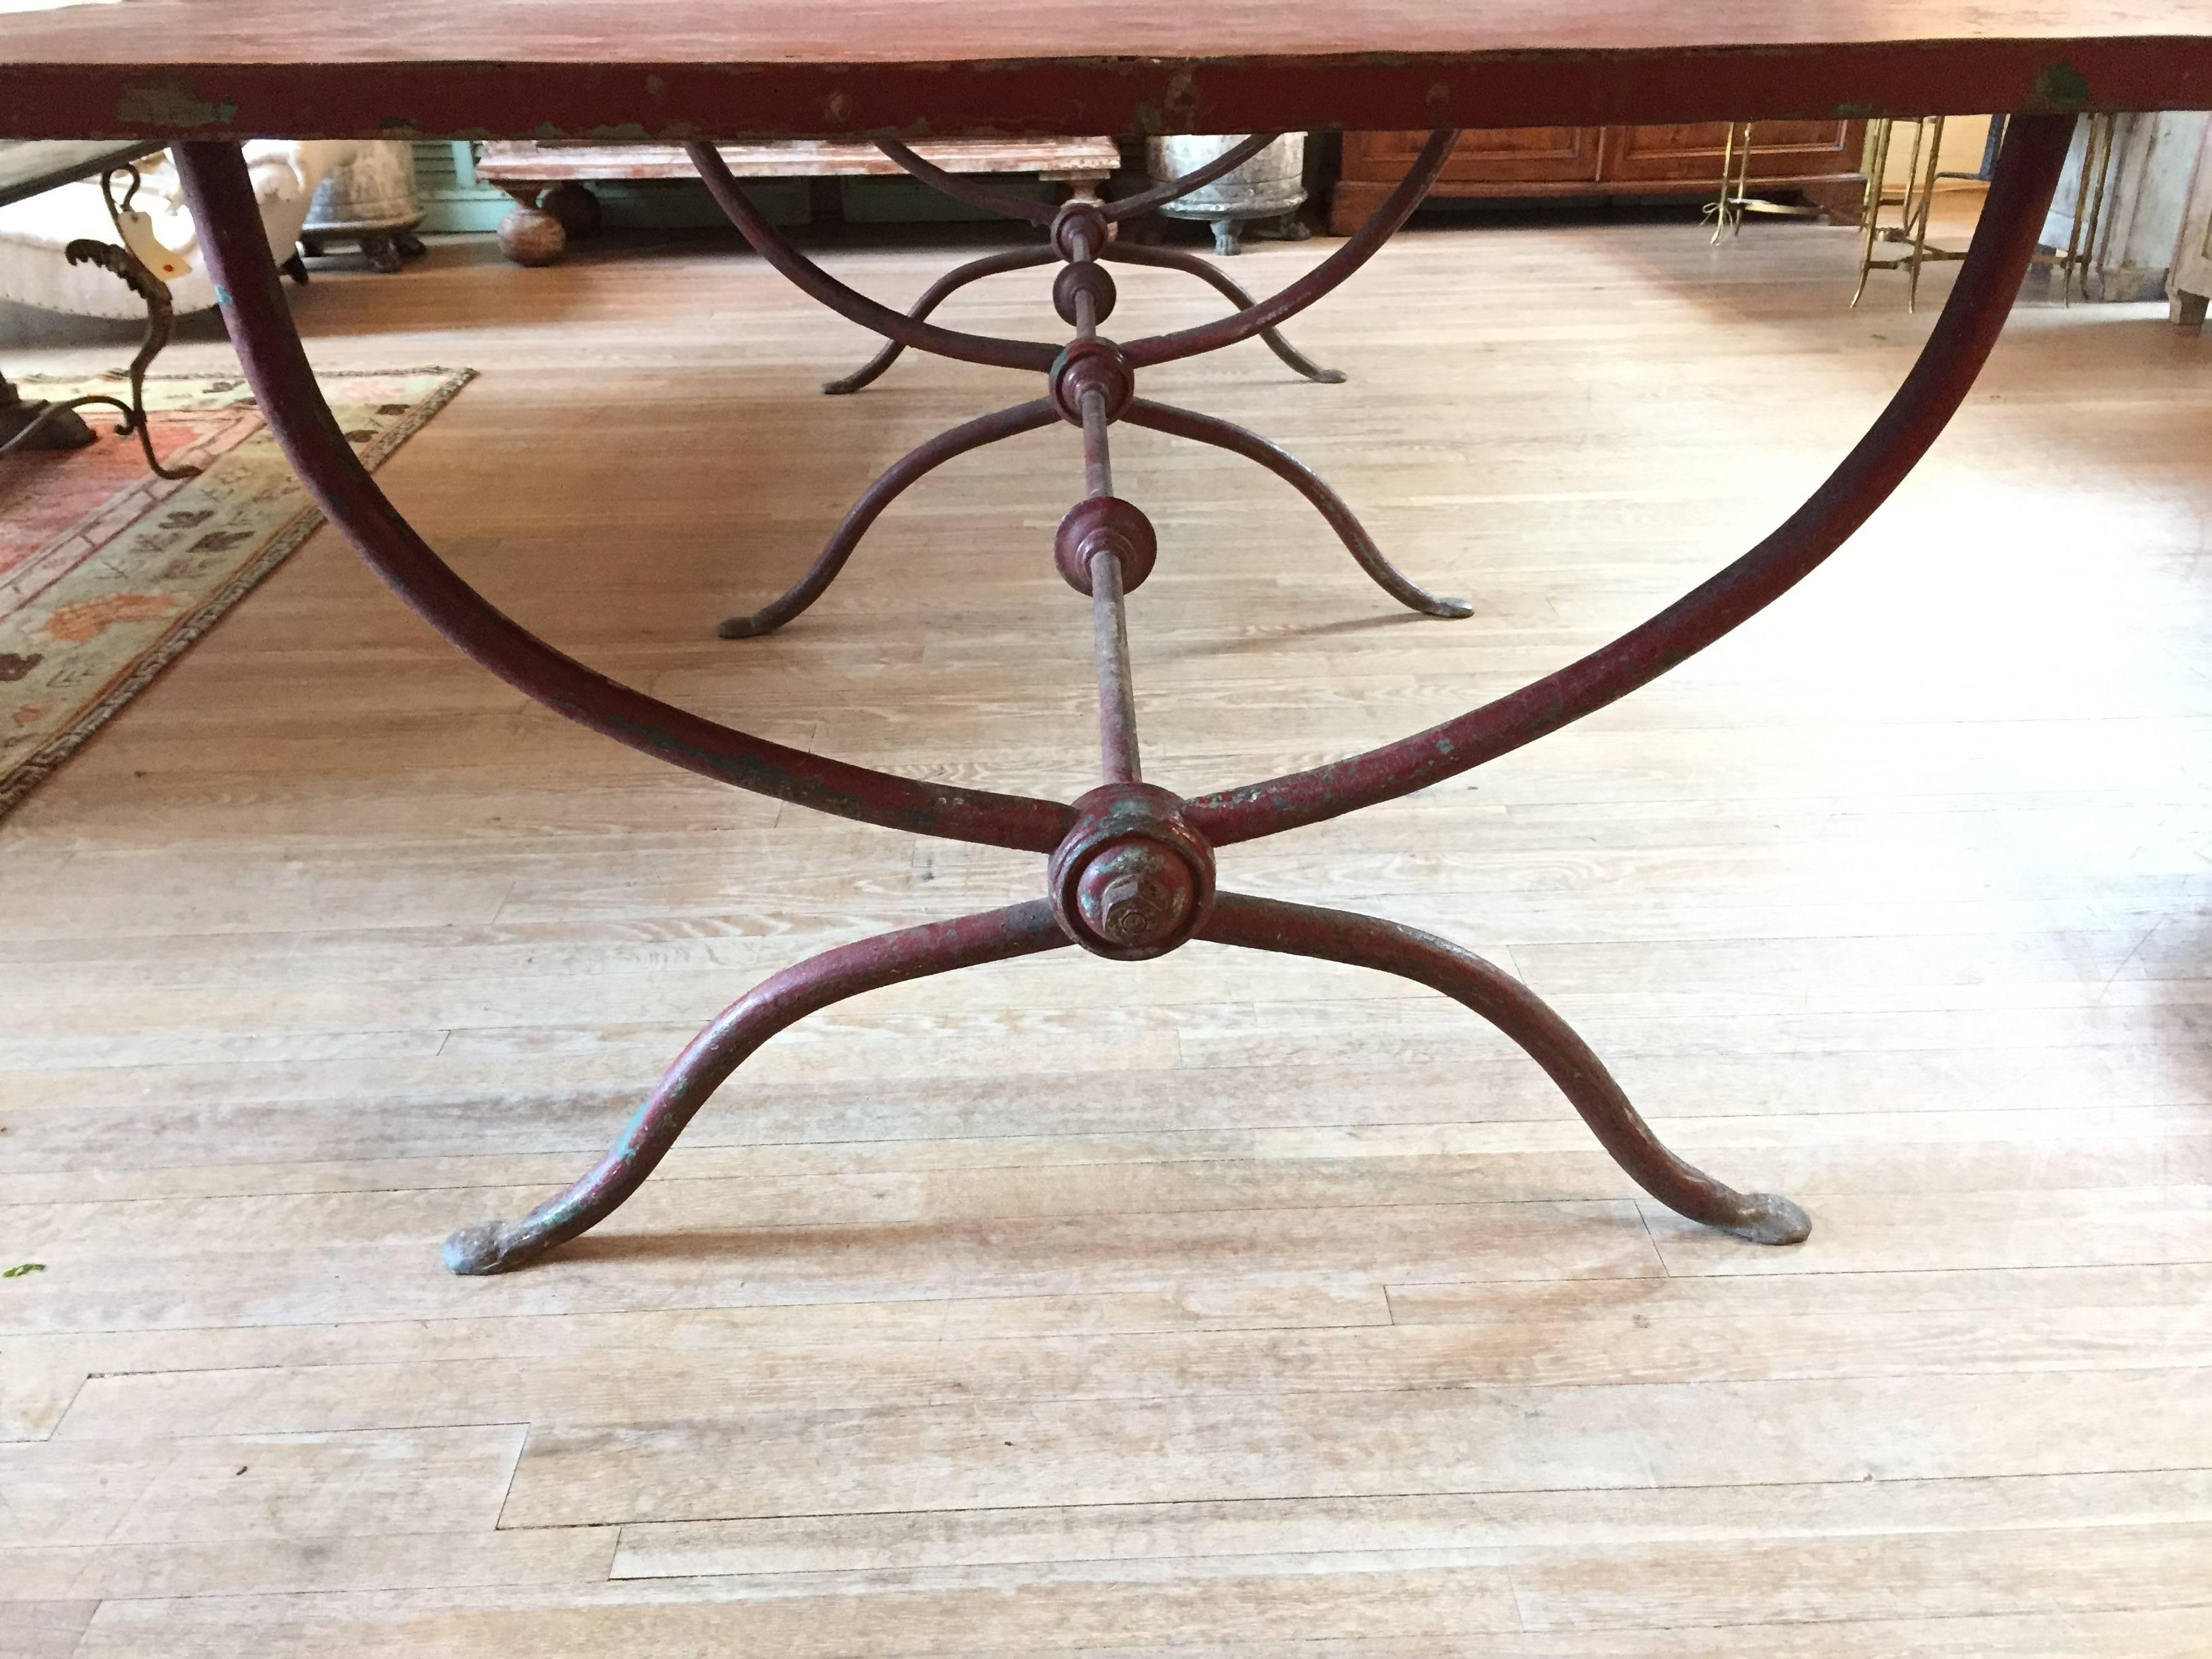 Handsome and large 19th century Italian garden table. Three sets of curved legs connected by iron rods with decorative rondels. Top braded in place. Great patina.